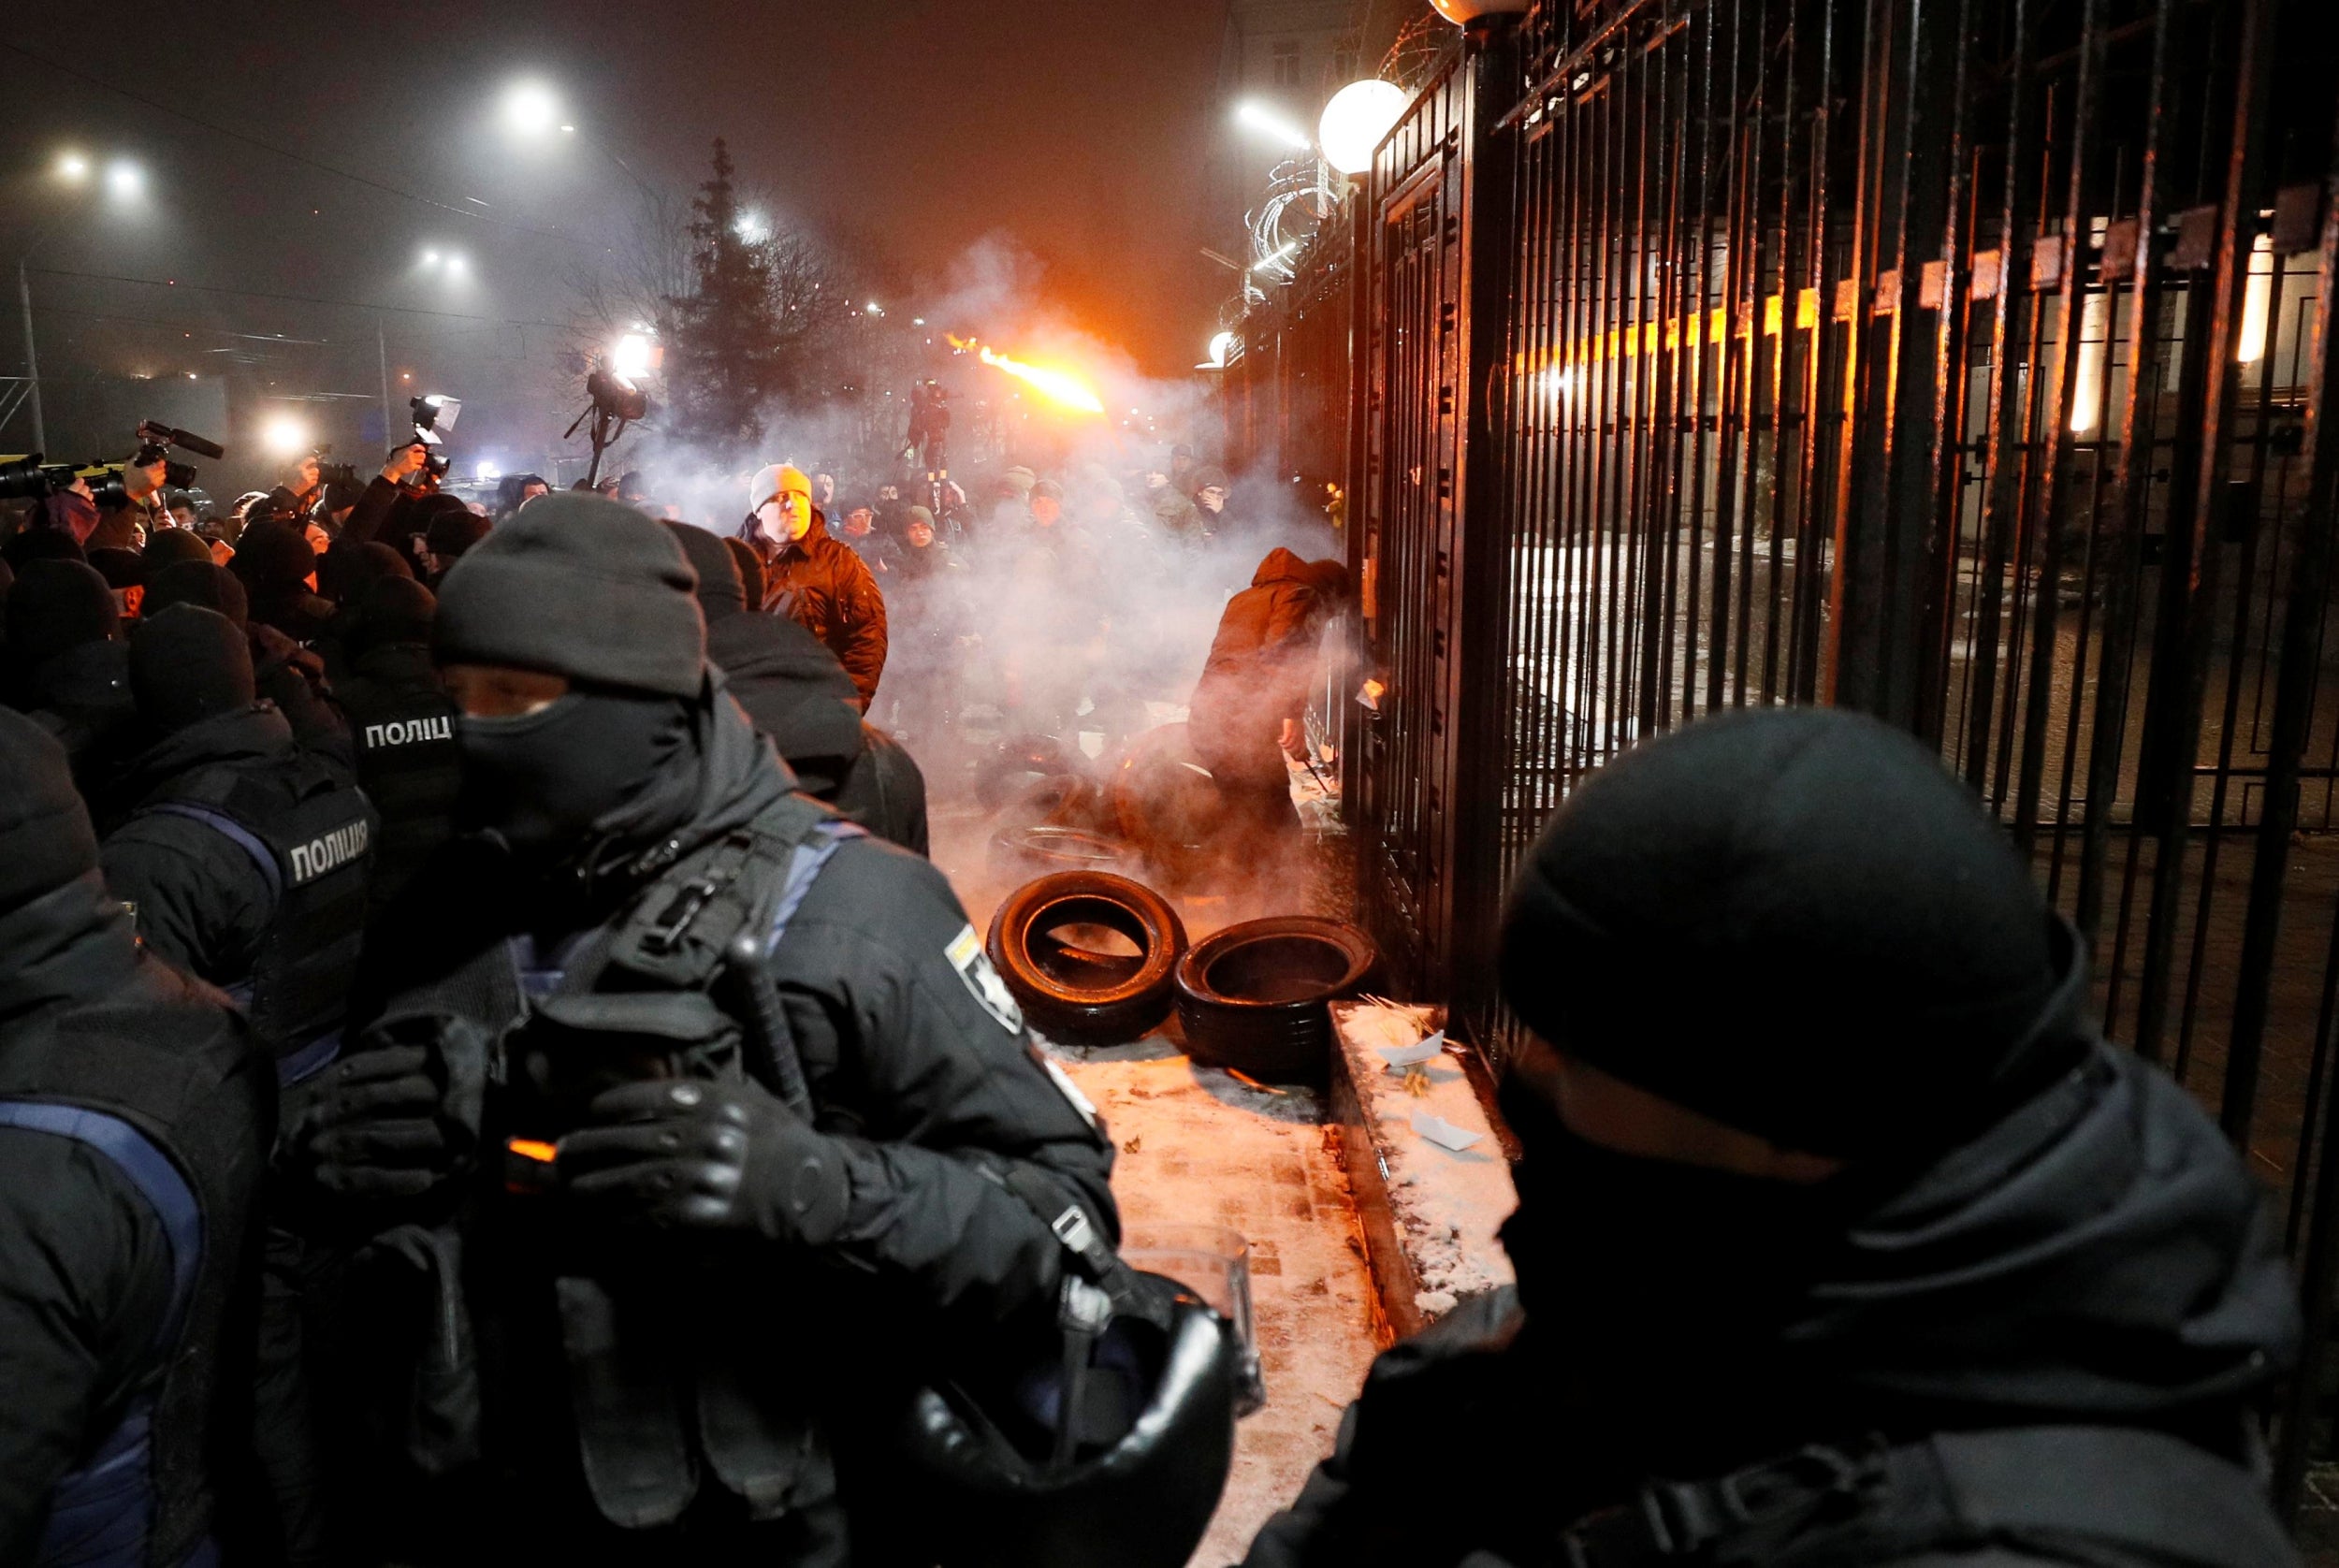 Protesters set fires outside the Russian embassy in Kiev after the seizure of three Ukrainian navy ships